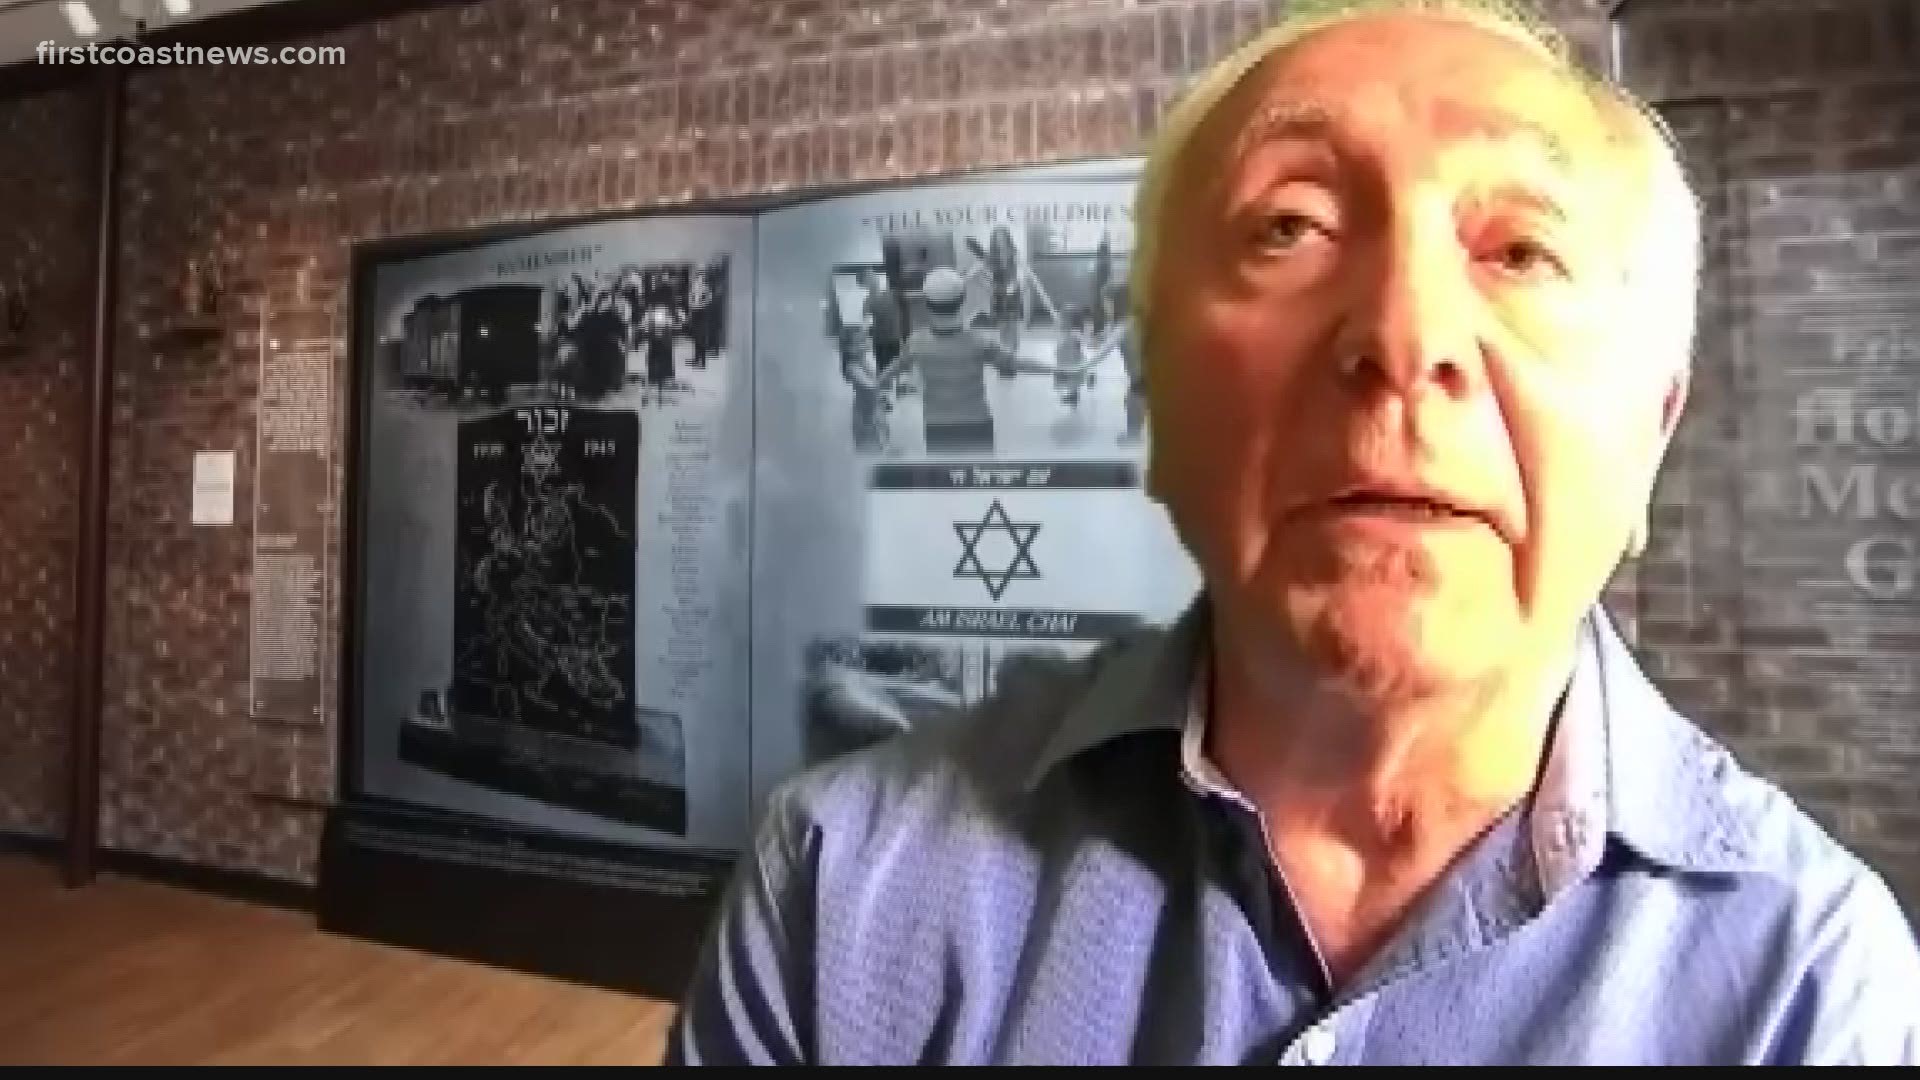 A Holocaust survivor reflects on the genocide that resulted in the deaths of 6 million Jews and 11 million others.